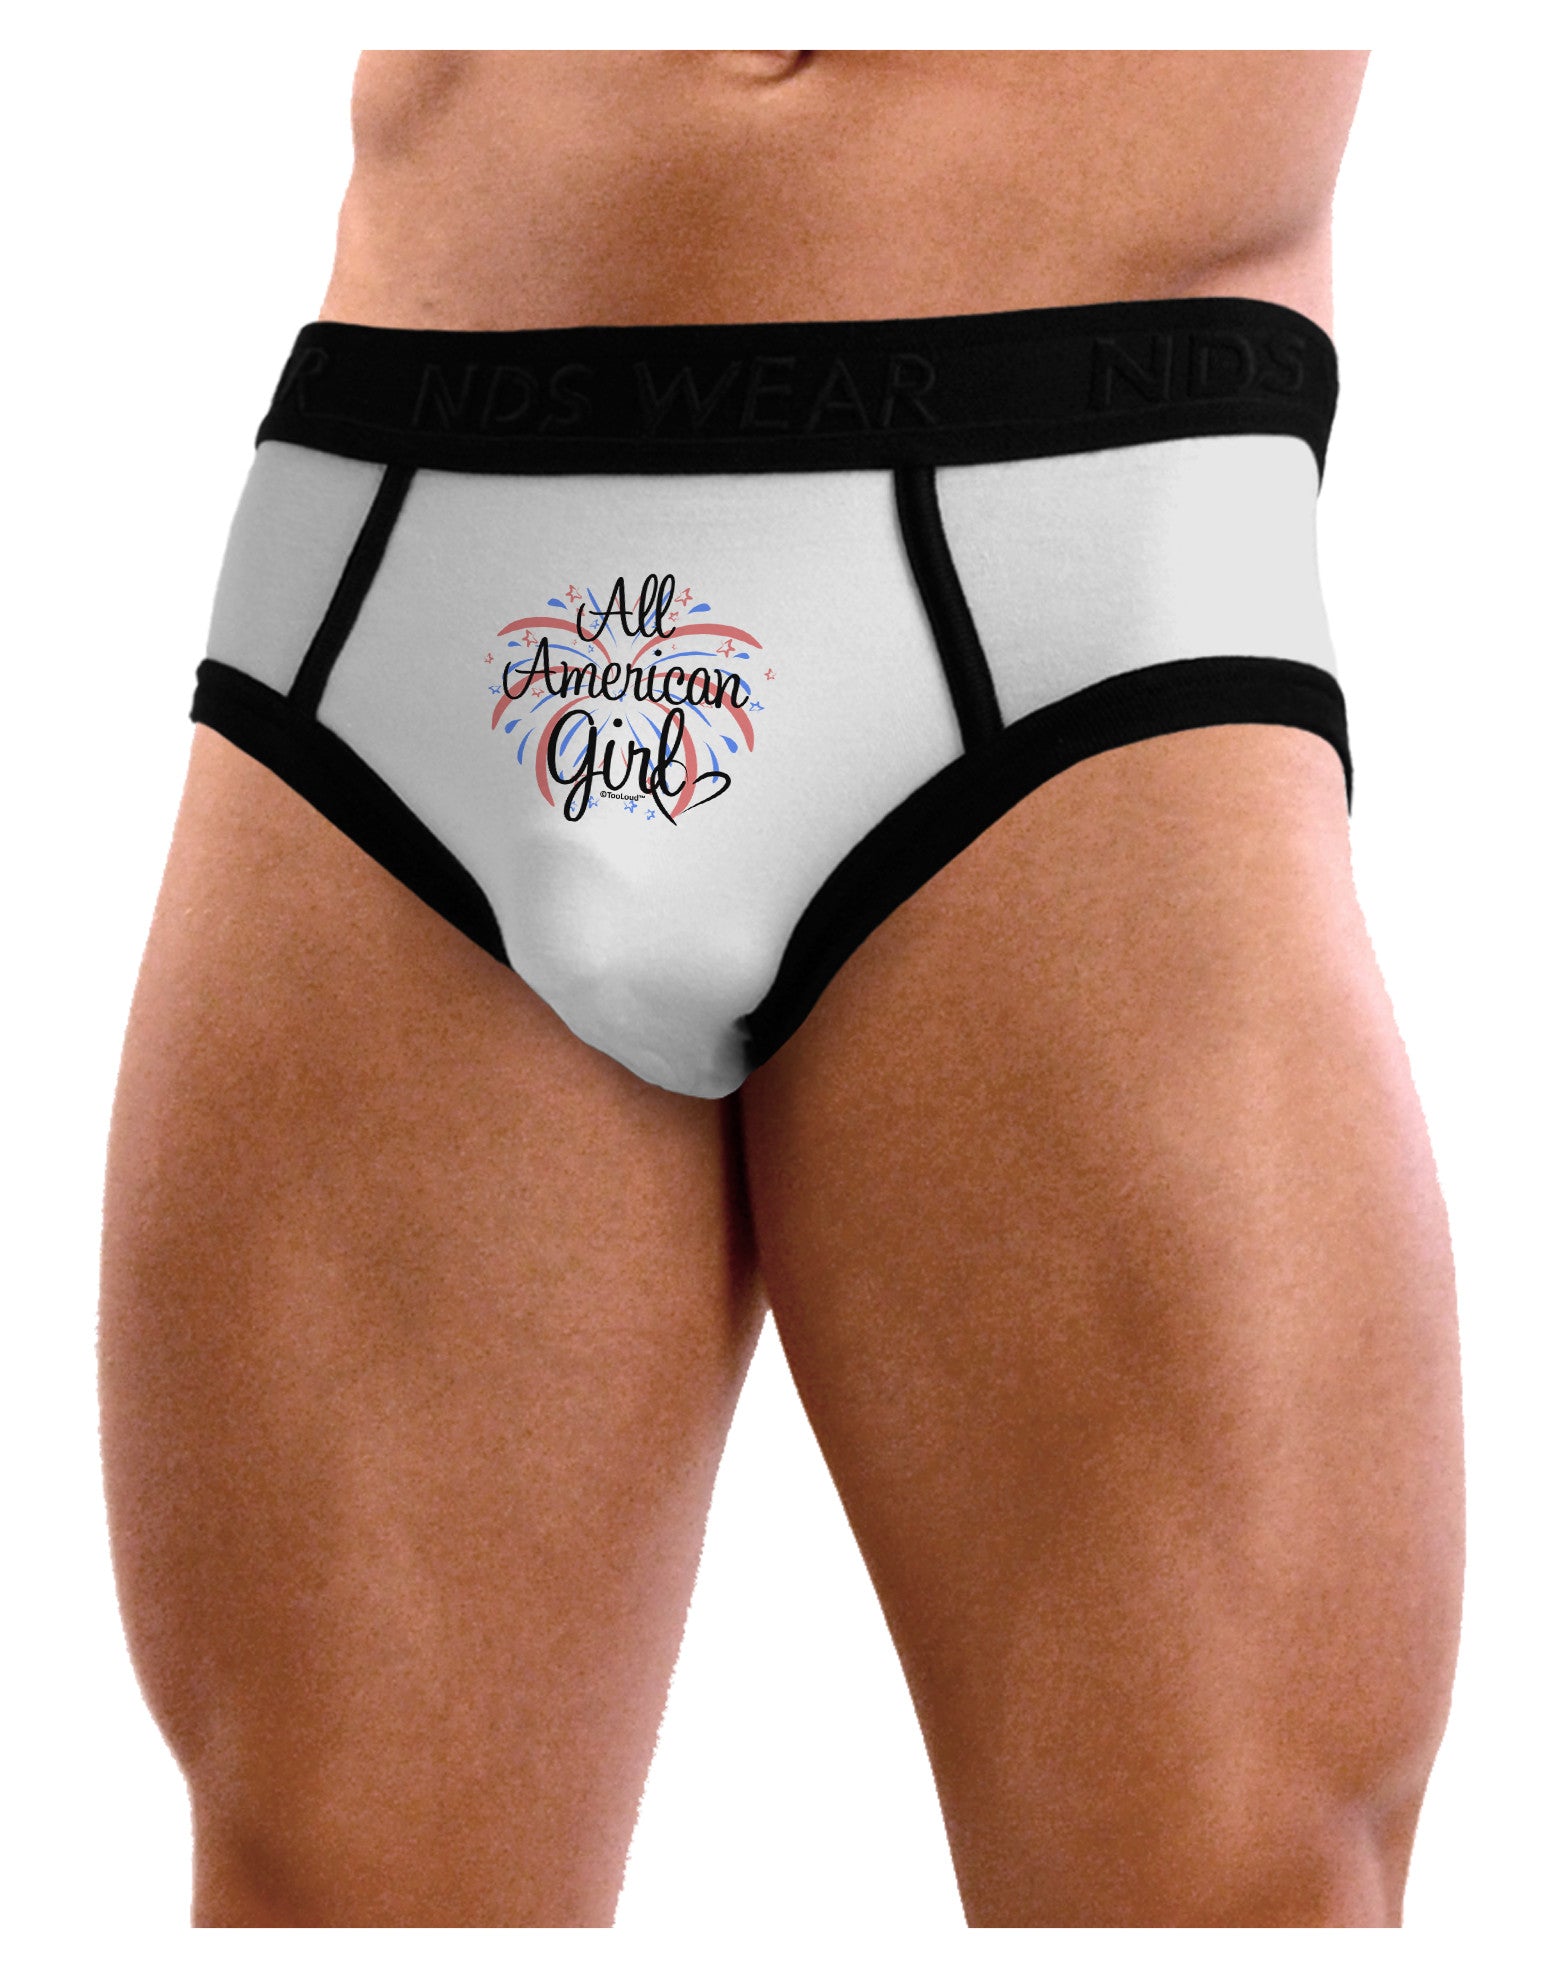 All American Girl - Fireworks and Heart Mens NDS Wear Briefs